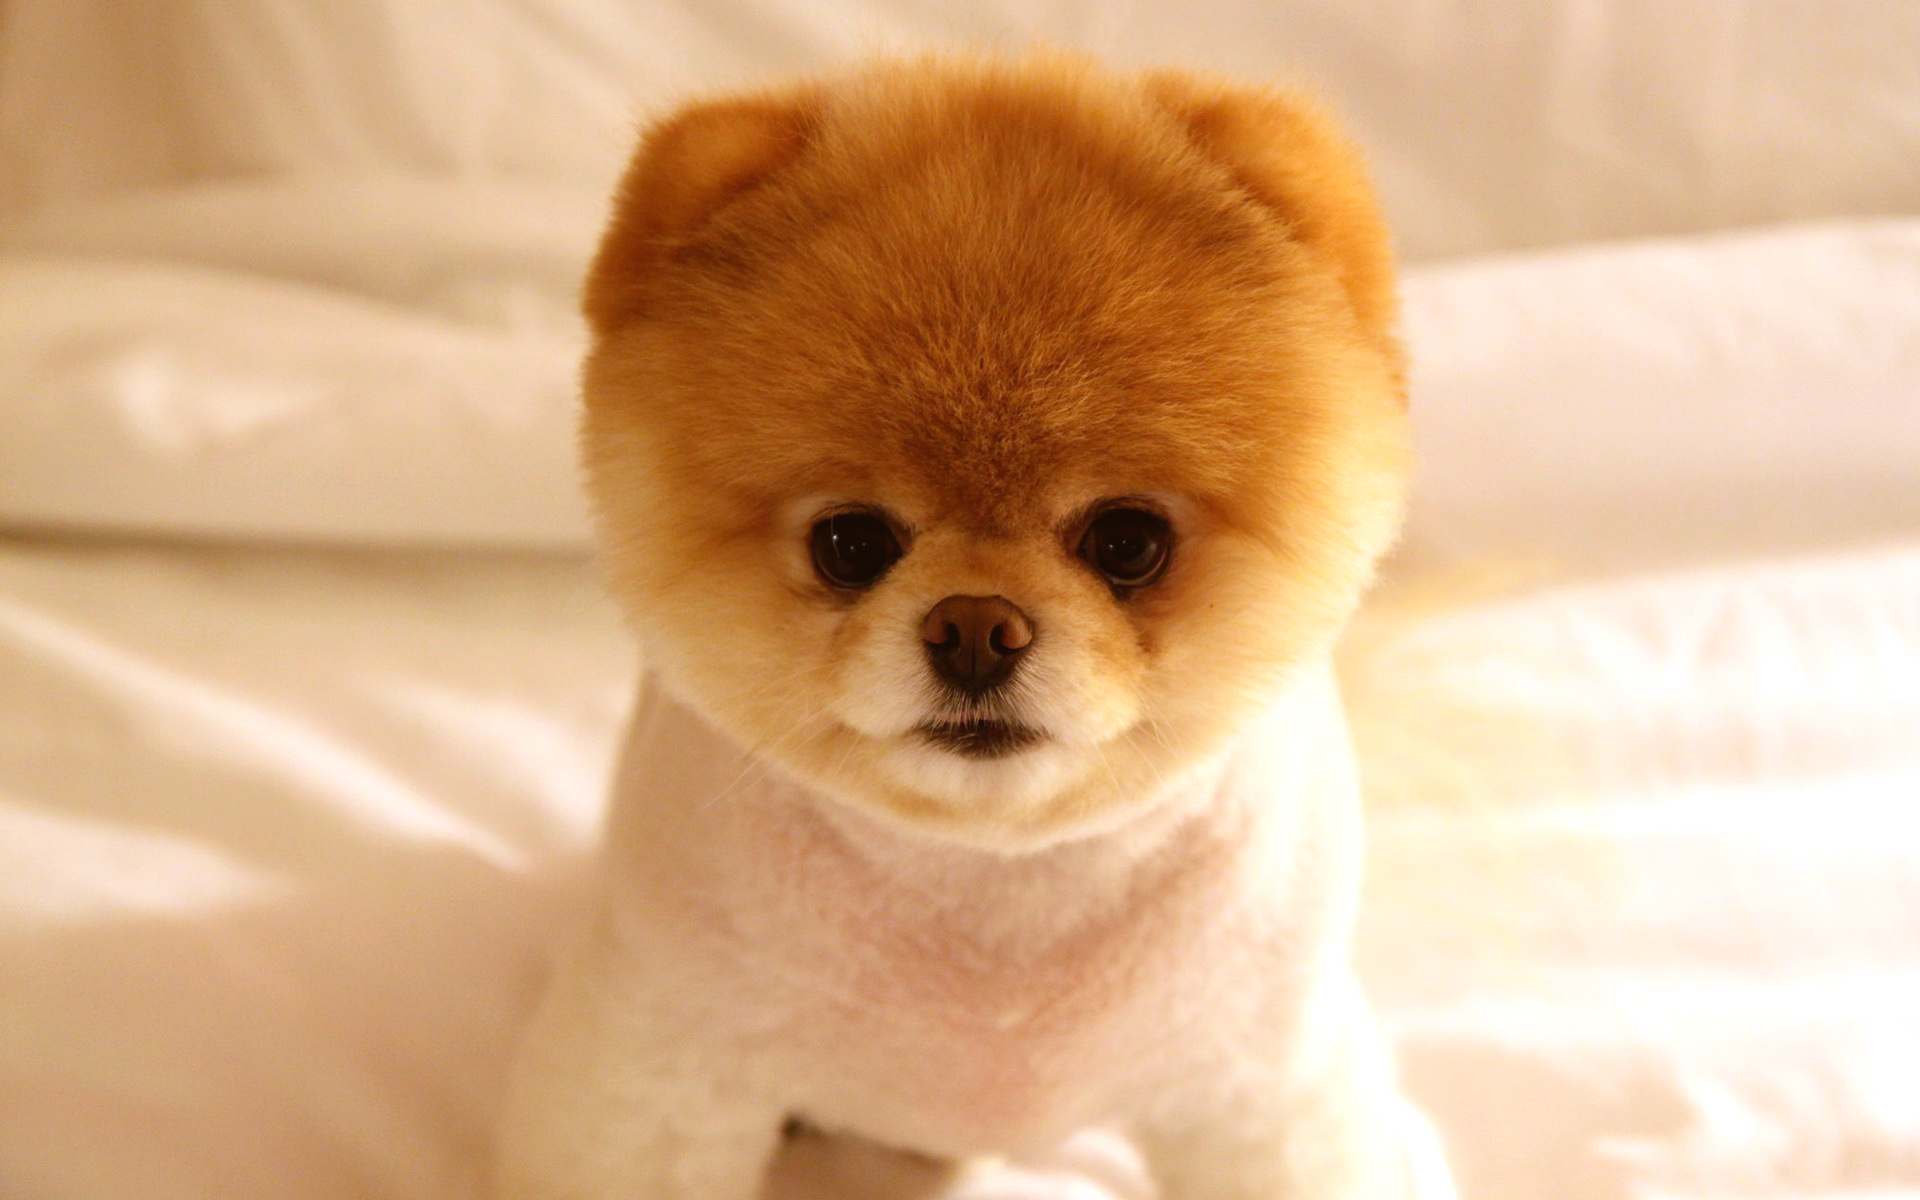 Cute Dog Boo Wallpapers | HD Wallpapers | ID #11864